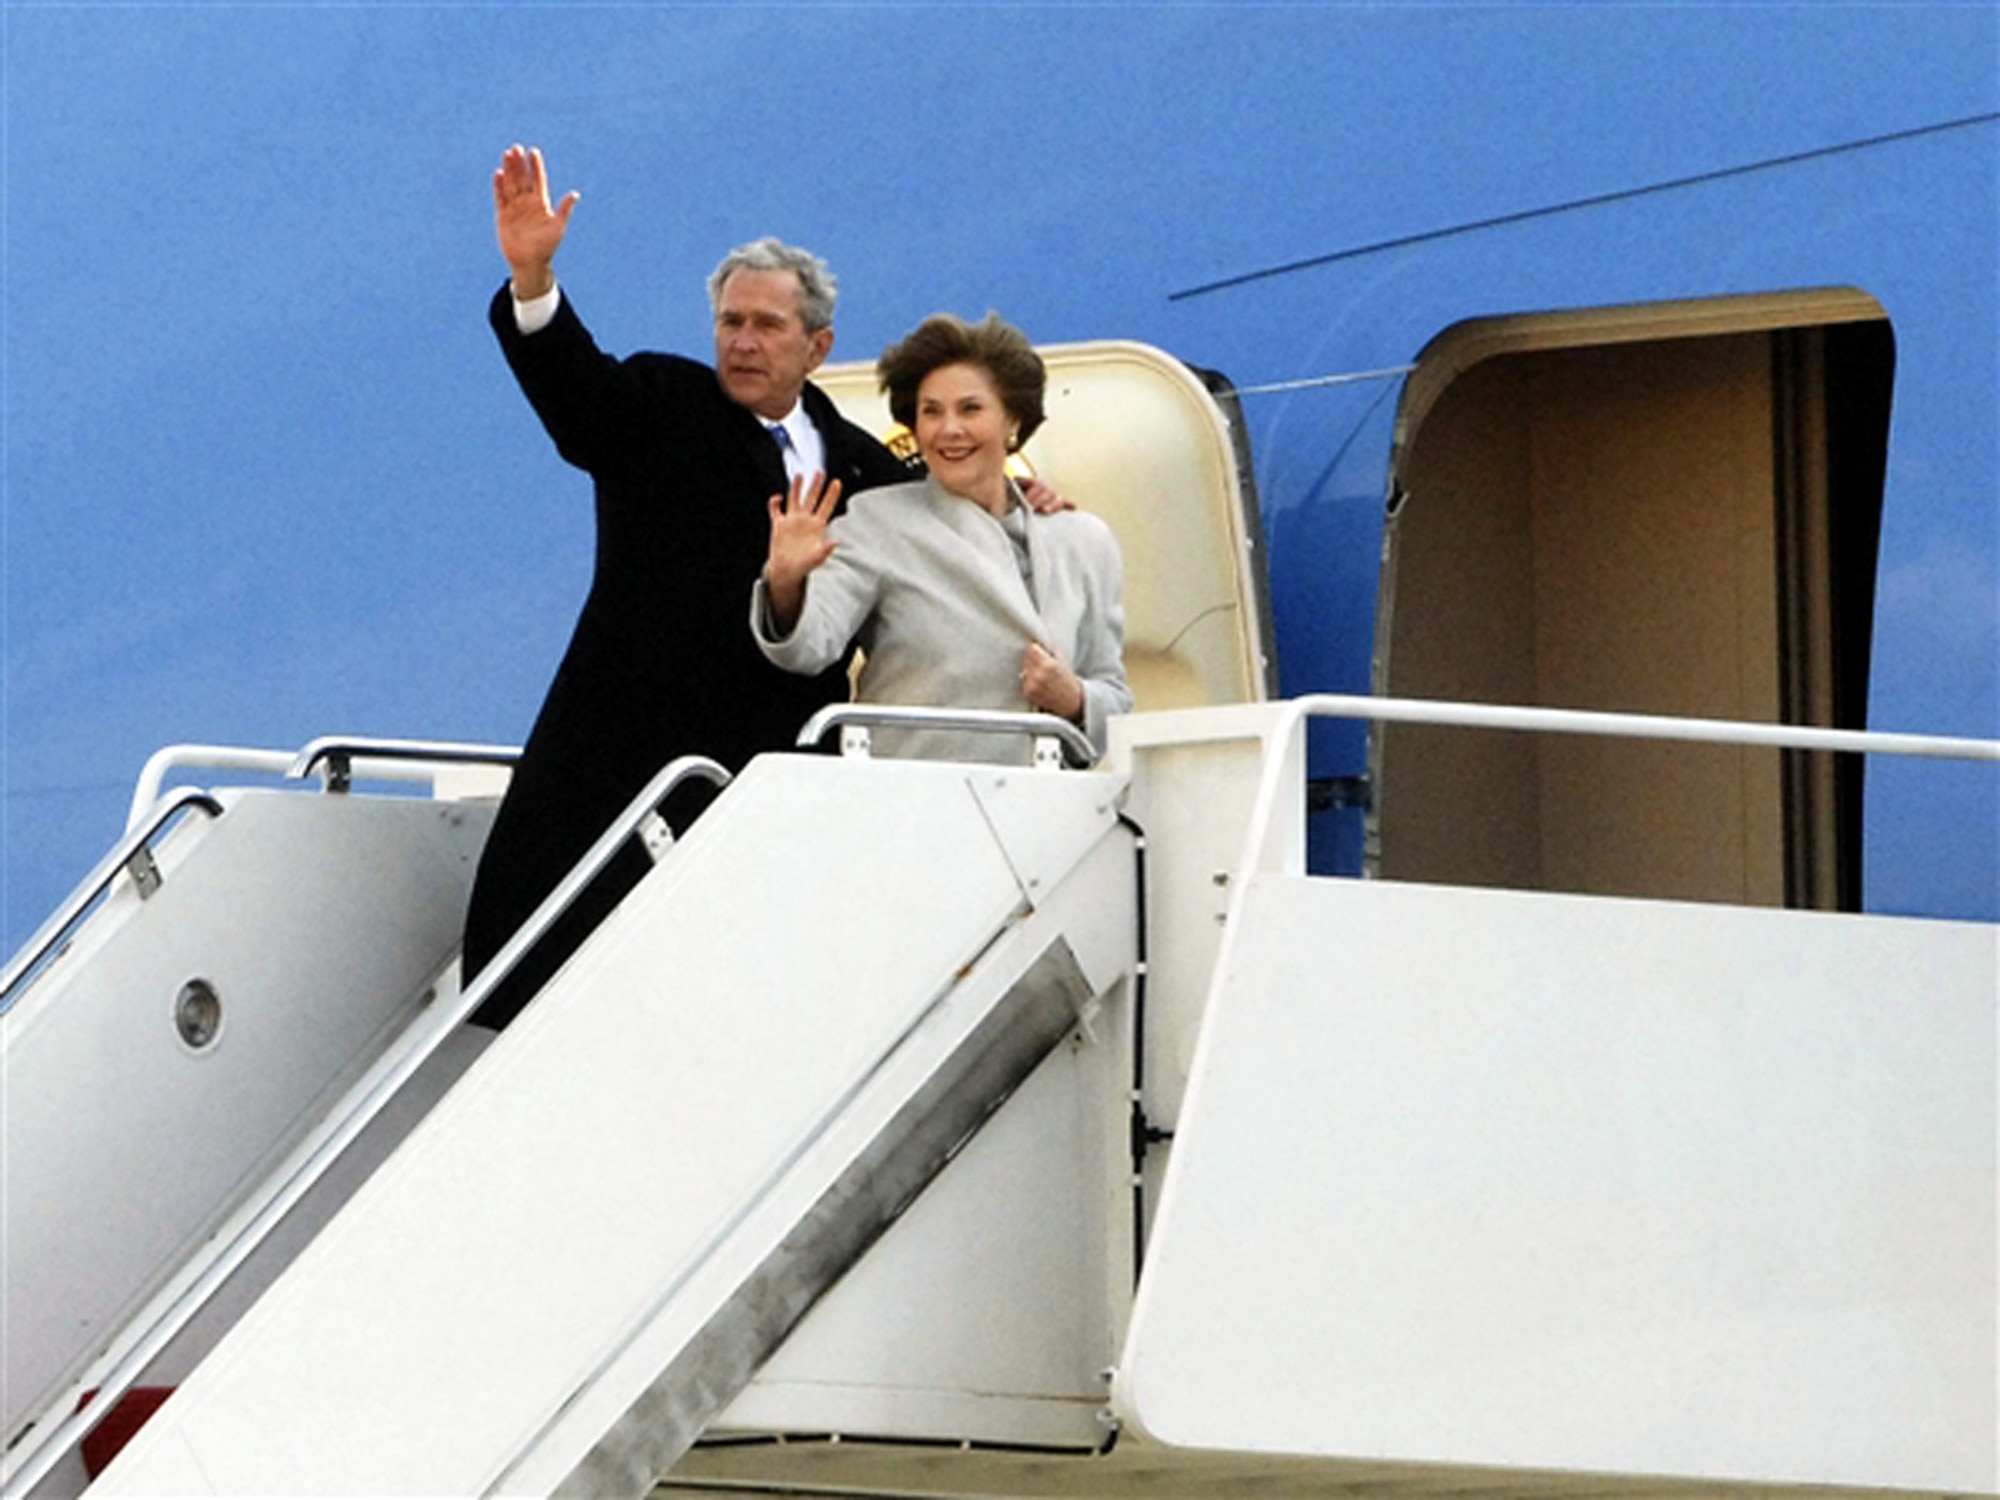 Former President George W. Bush and First Lady Laura Bush give a final wave to the crowd of more than 1,000 people gathered at Andrews Air Force Base, Md., prior to their final departure aboard Air Force One, Jan. 20, 2009. (U.S. Air Force Photo/Tech. Sgt. Craig Clapper)